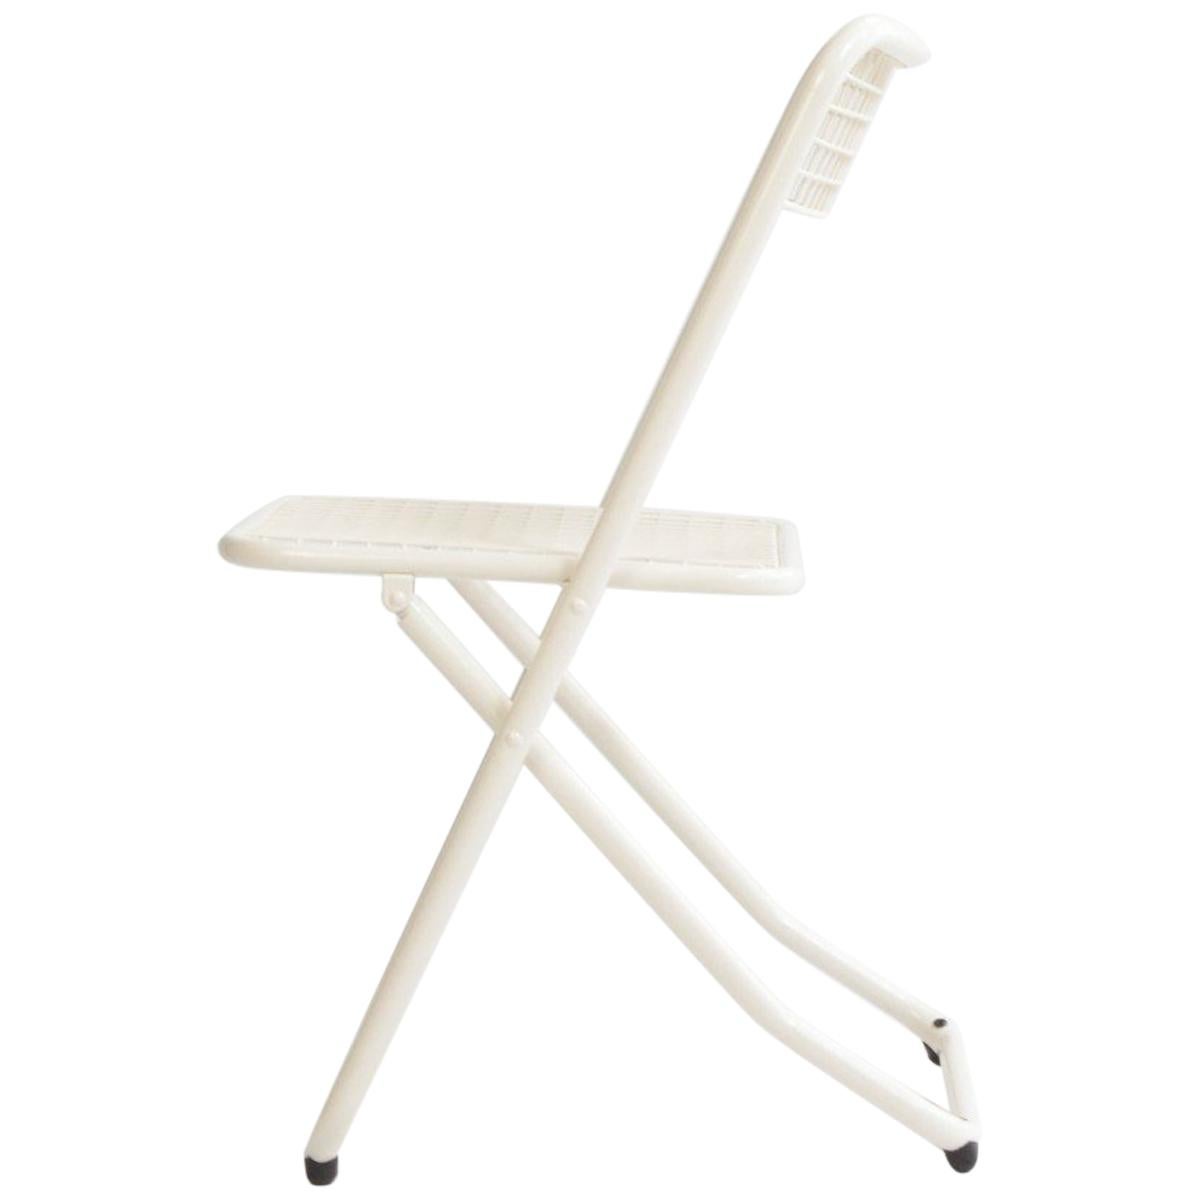 New Folding Iron Chair Beige 1013 by Houtique signed by Federico Giner, Spain